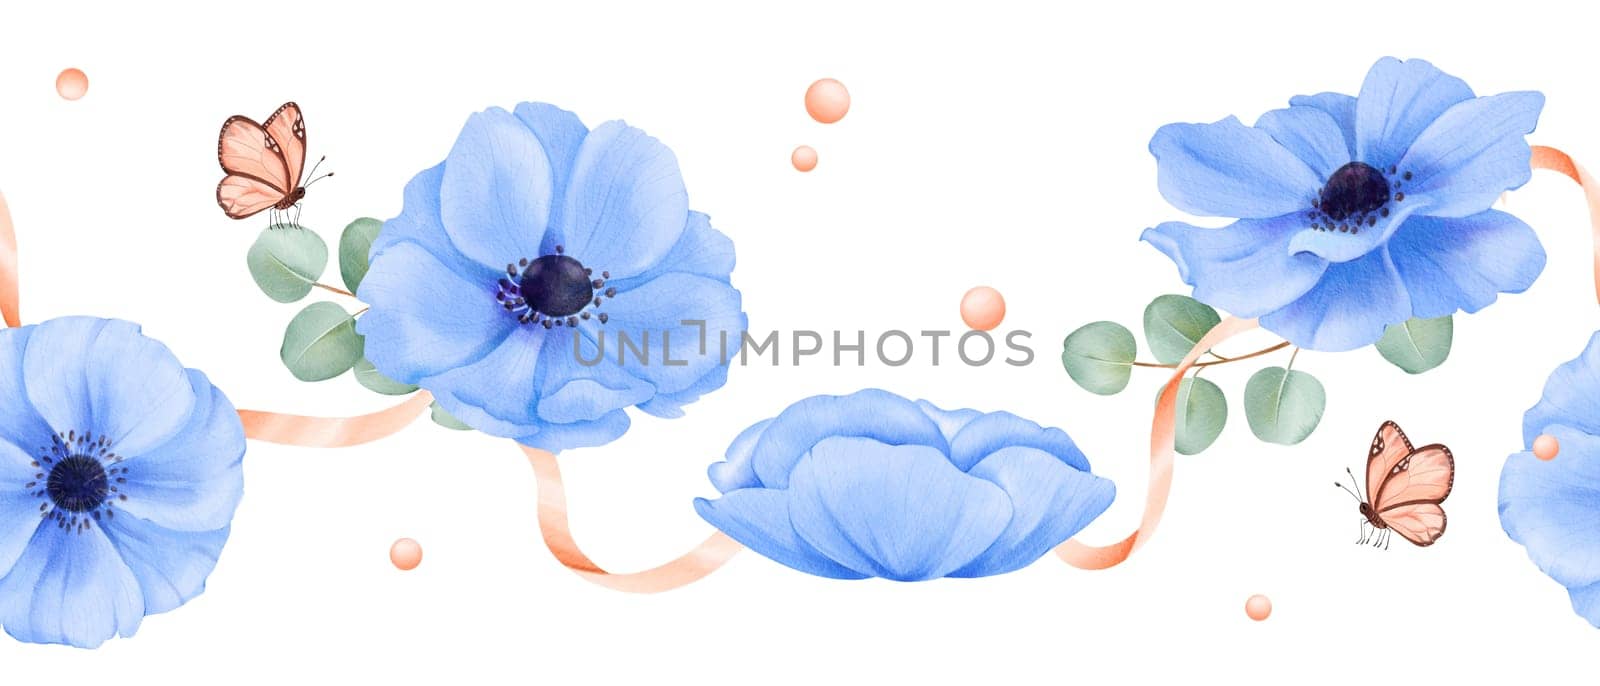 A seamless border. delicate blue anemones, eucalyptus leaves, adorned with ribbons, rhinestones, and butterflies. watercolor illustration for wedding stationery event invitations or digital designs.